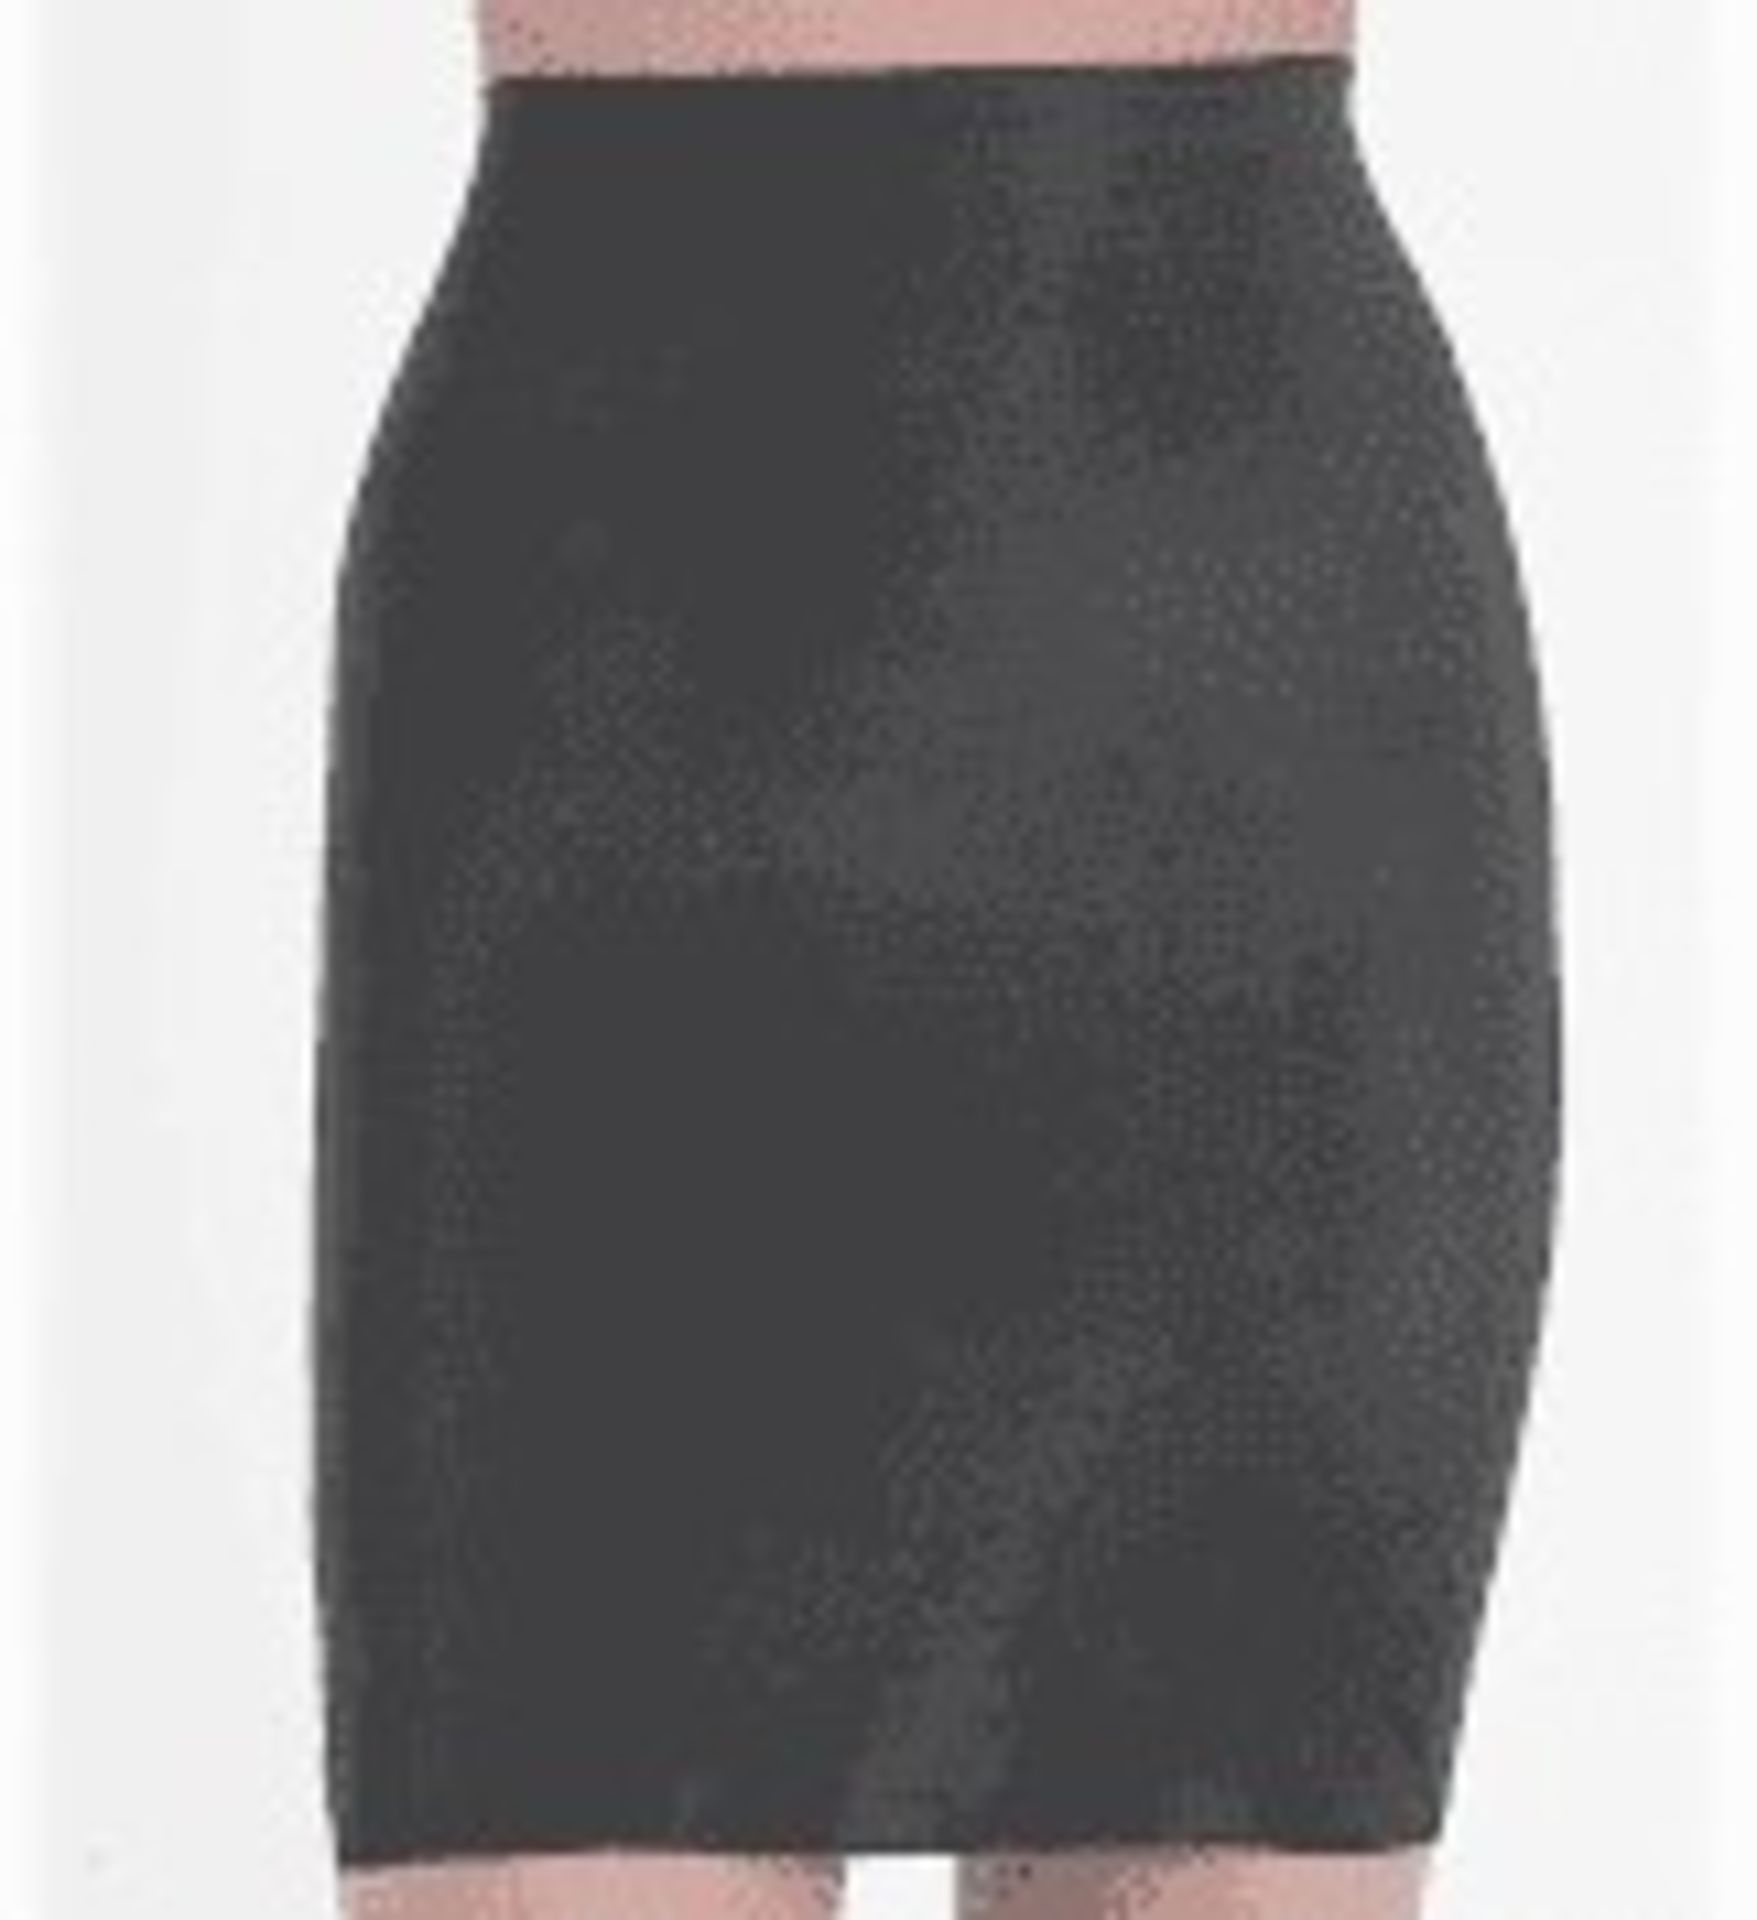 1 LOT TO CONTAIN 5 SPANX SKIRTS IN BOLD BLACK / SIZE 8 / STYLE 1899 / RRP £1144.00 (PUBLIC VIEWING